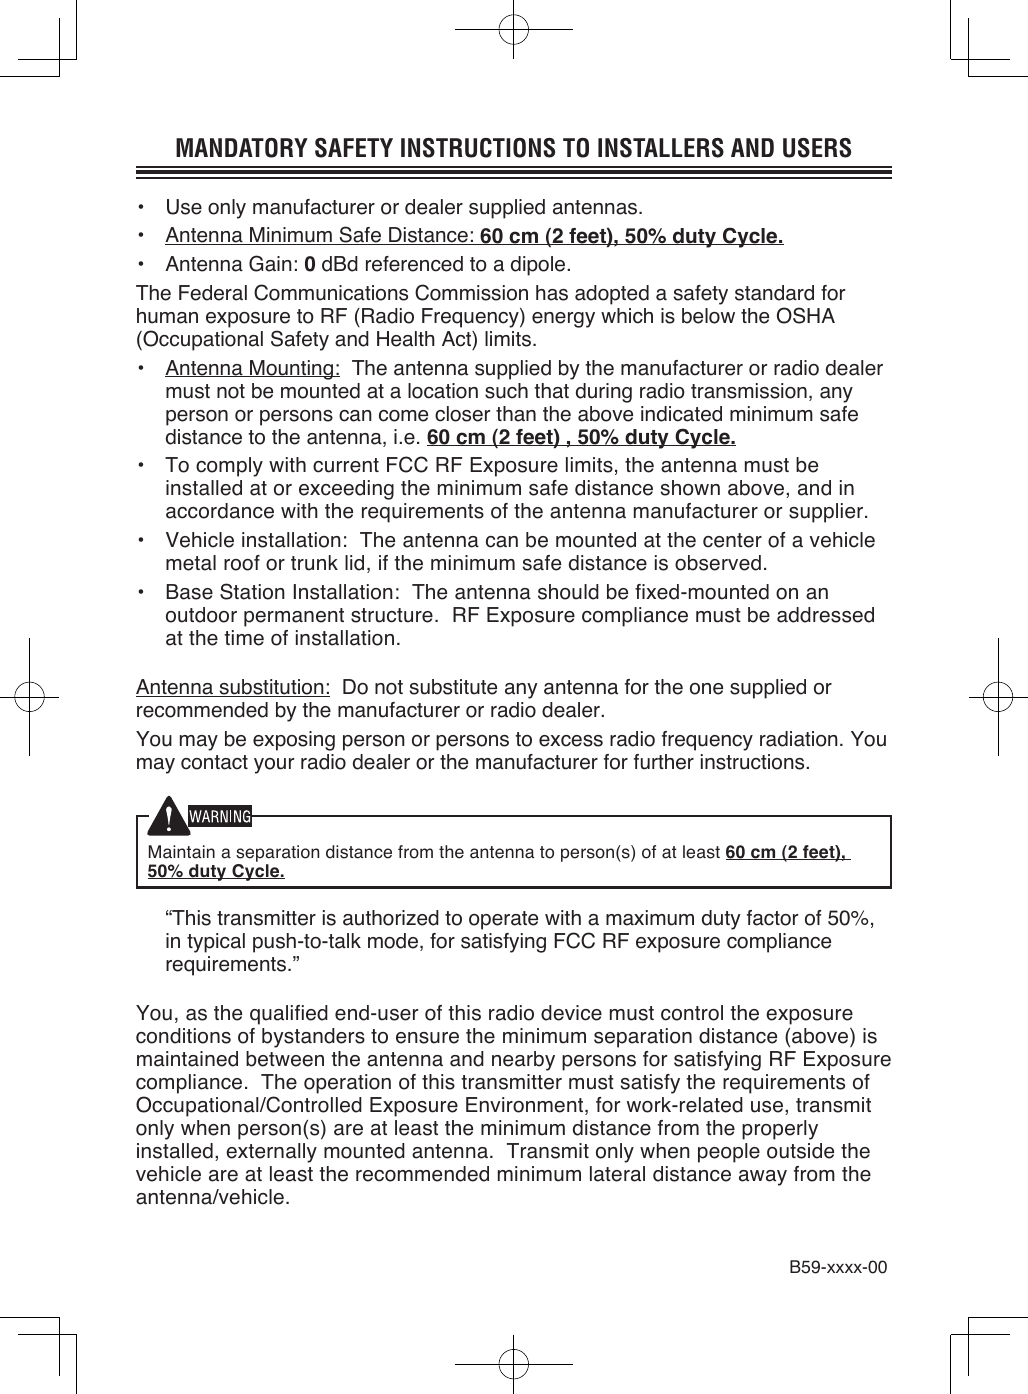 MANDATORY SAFETY INSTRUCTIONS TO INSTALLERS AND USERS•  Use only manufacturer or dealer supplied antennas.•  Antenna Minimum Safe Distance: 60 cm (2 feet), 50% duty Cycle.•  Antenna Gain: 0 dBd referenced to a dipole.The Federal Communications Commission has adopted a safety standard for human exposure to RF (Radio Frequency) energy which is below the OSHA (Occupational Safety and Health Act) limits.•  Antenna Mounting:  The antenna supplied by the manufacturer or radio dealer must not be mounted at a location such that during radio transmission, any person or persons can come closer than the above indicated minimum safe distance to the antenna, i.e. 60 cm (2 feet) , 50% duty Cycle.•  To comply with current FCC RF Exposure limits, the antenna must be installed at or exceeding the minimum safe distance shown above, and in accordance with the requirements of the antenna manufacturer or supplier.•  Vehicle installation:  The antenna can be mounted at the center of a vehicle metal roof or trunk lid, if the minimum safe distance is observed.•  Base Station Installation:  The antenna should be fixed-mounted on an outdoor permanent structure.  RF Exposure compliance must be addressed at the time of installation.Antenna substitution:  Do not substitute any antenna for the one supplied or recommended by the manufacturer or radio dealer.You may be exposing person or persons to excess radio frequency radiation. You may contact your radio dealer or the manufacturer for further instructions.Maintain a separation distance from the antenna to person(s) of at least 60 cm (2 feet), 50% duty Cycle.  “This transmitter is authorized to operate with a maximum duty factor of 50%, in typical push-to-talk mode, for satisfying FCC RF exposure compliance requirements.”You, as the qualified end-user of this radio device must control the exposure conditions of bystanders to ensure the minimum separation distance (above) is maintained between the antenna and nearby persons for satisfying RF Exposure compliance.  The operation of this transmitter must satisfy the requirements of Occupational/Controlled Exposure Environment, for work-related use, transmit only when person(s) are at least the minimum distance from the properly installed, externally mounted antenna.  Transmit only when people outside the vehicle are at least the recommended minimum lateral distance away from the antenna/vehicle.B59-xxxx-00